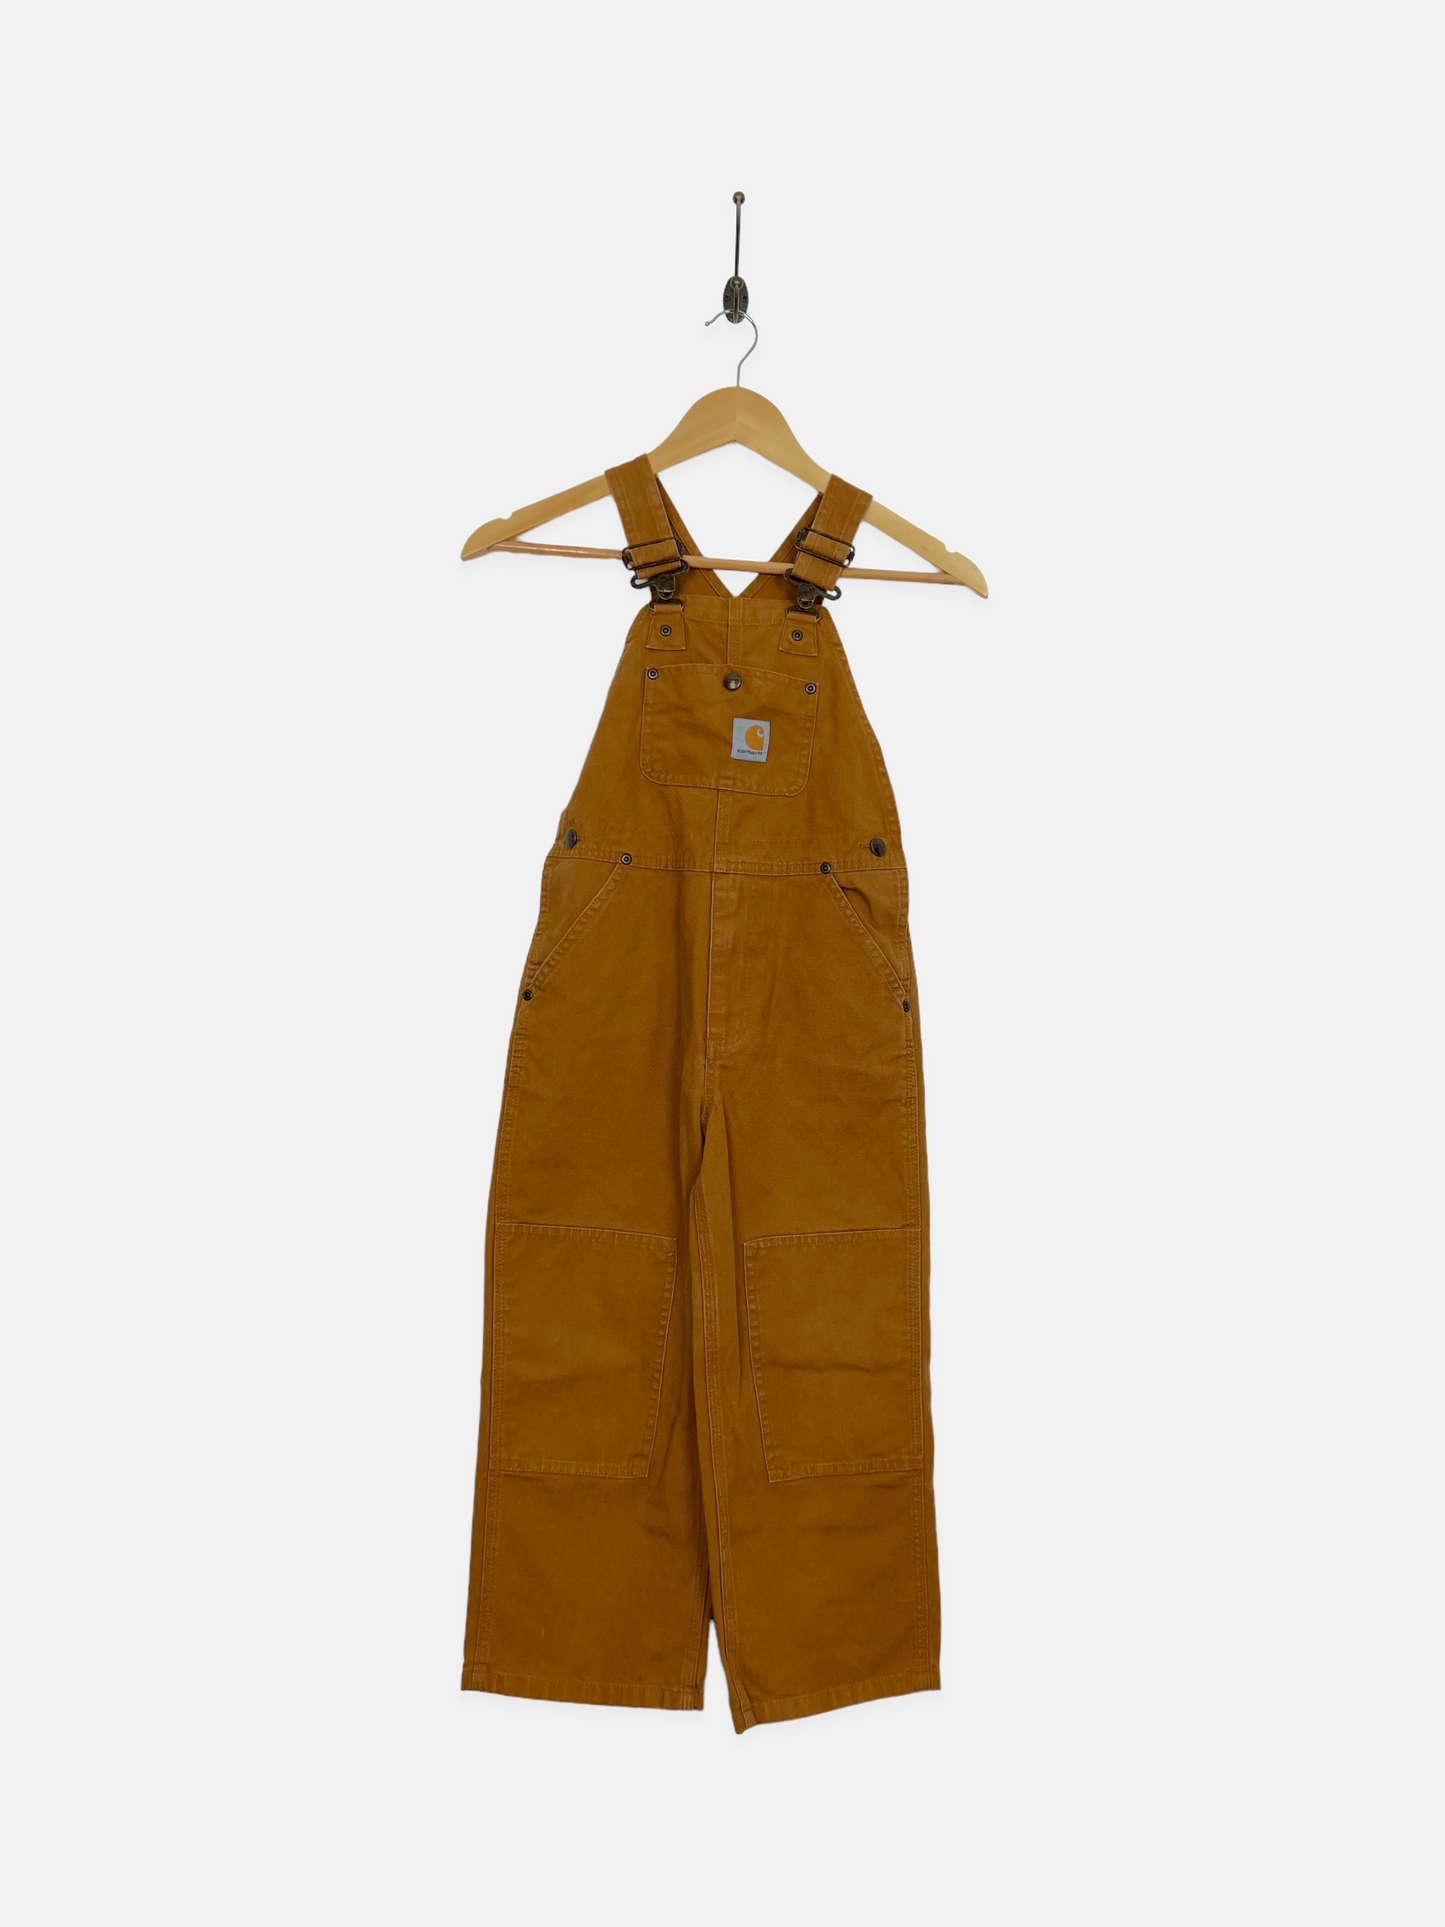 90's Youth Carhartt Heavy Duty Vintage Dungarees/Overalls Kids Size 6